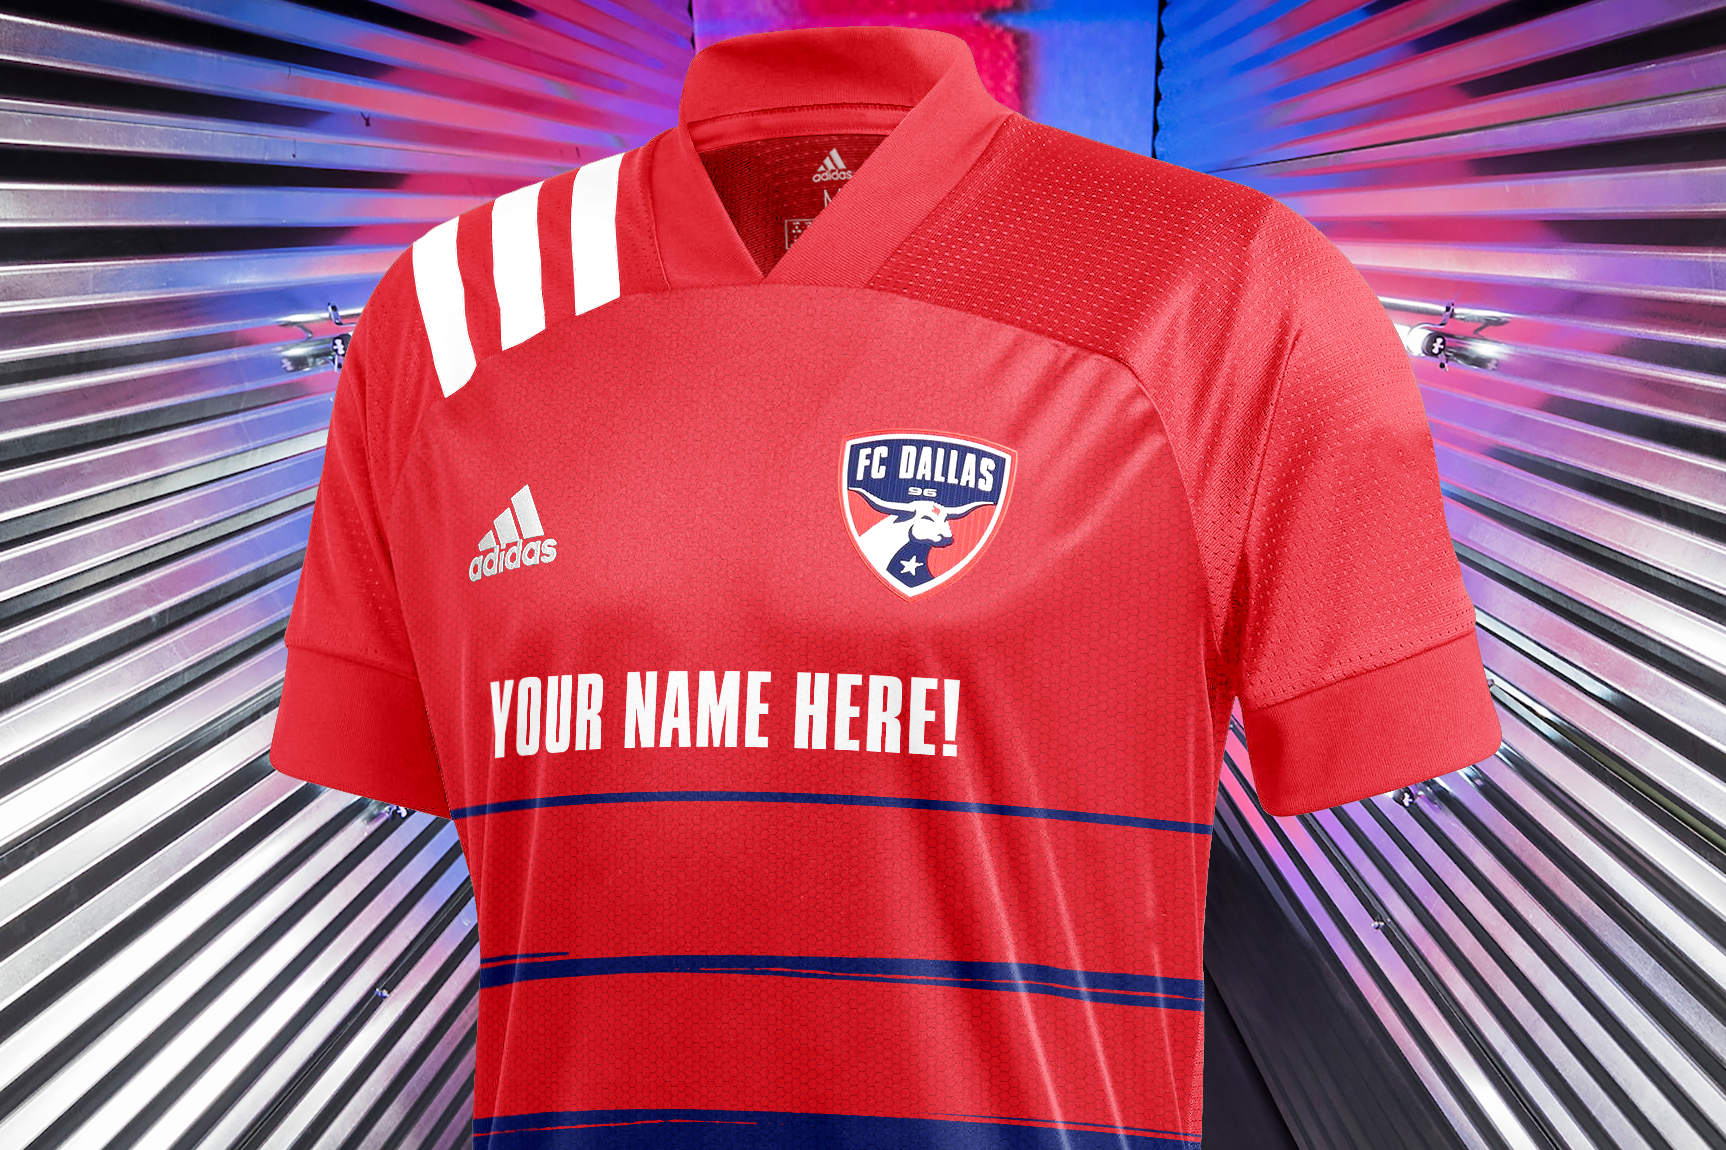 A new FC Dallas secondary jersey is coming, let's have some fun